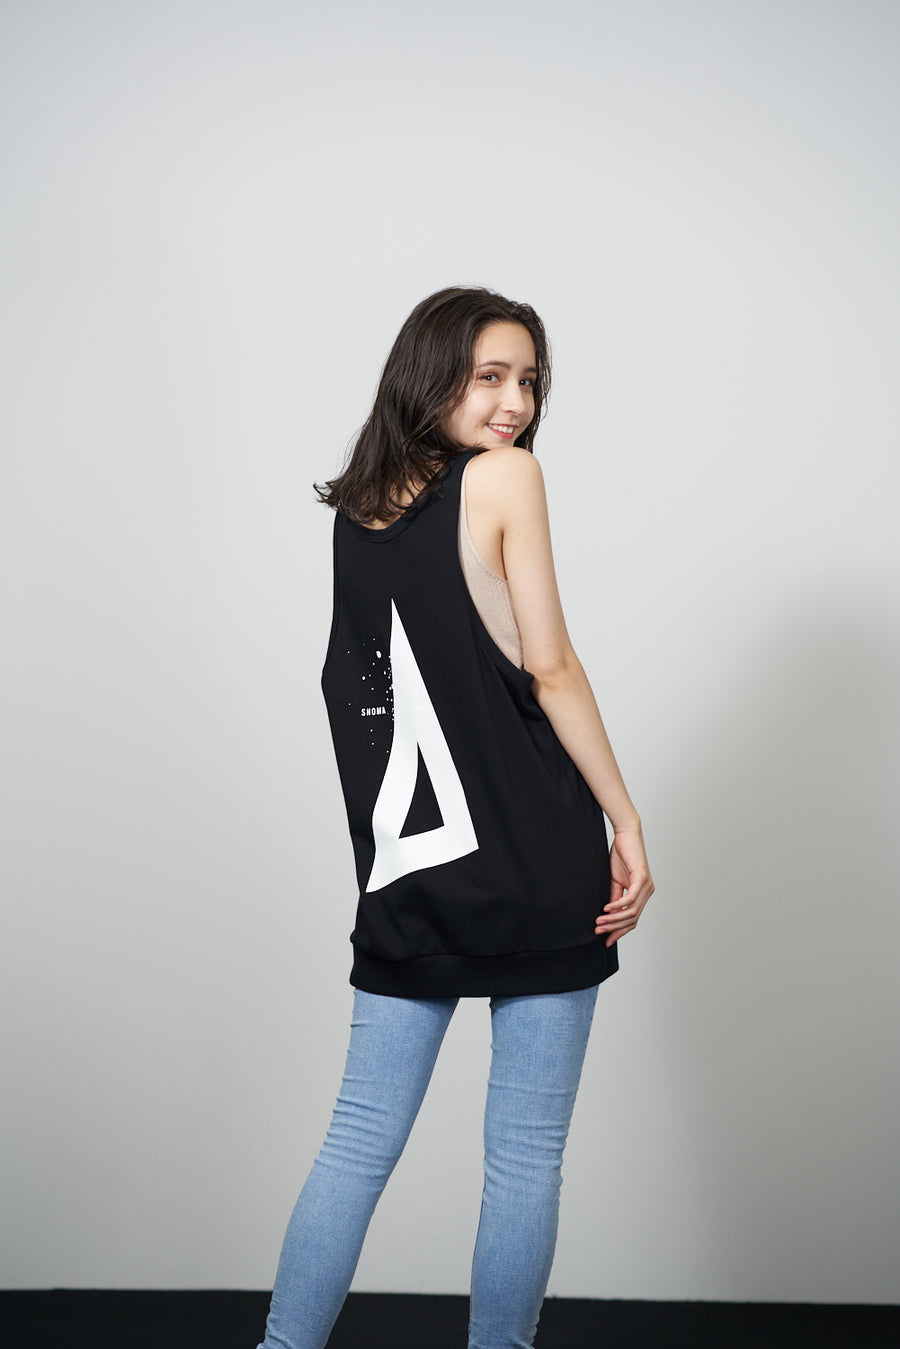 JERSEY ACTIVE TOP［Triangle of SHOMA］- Black